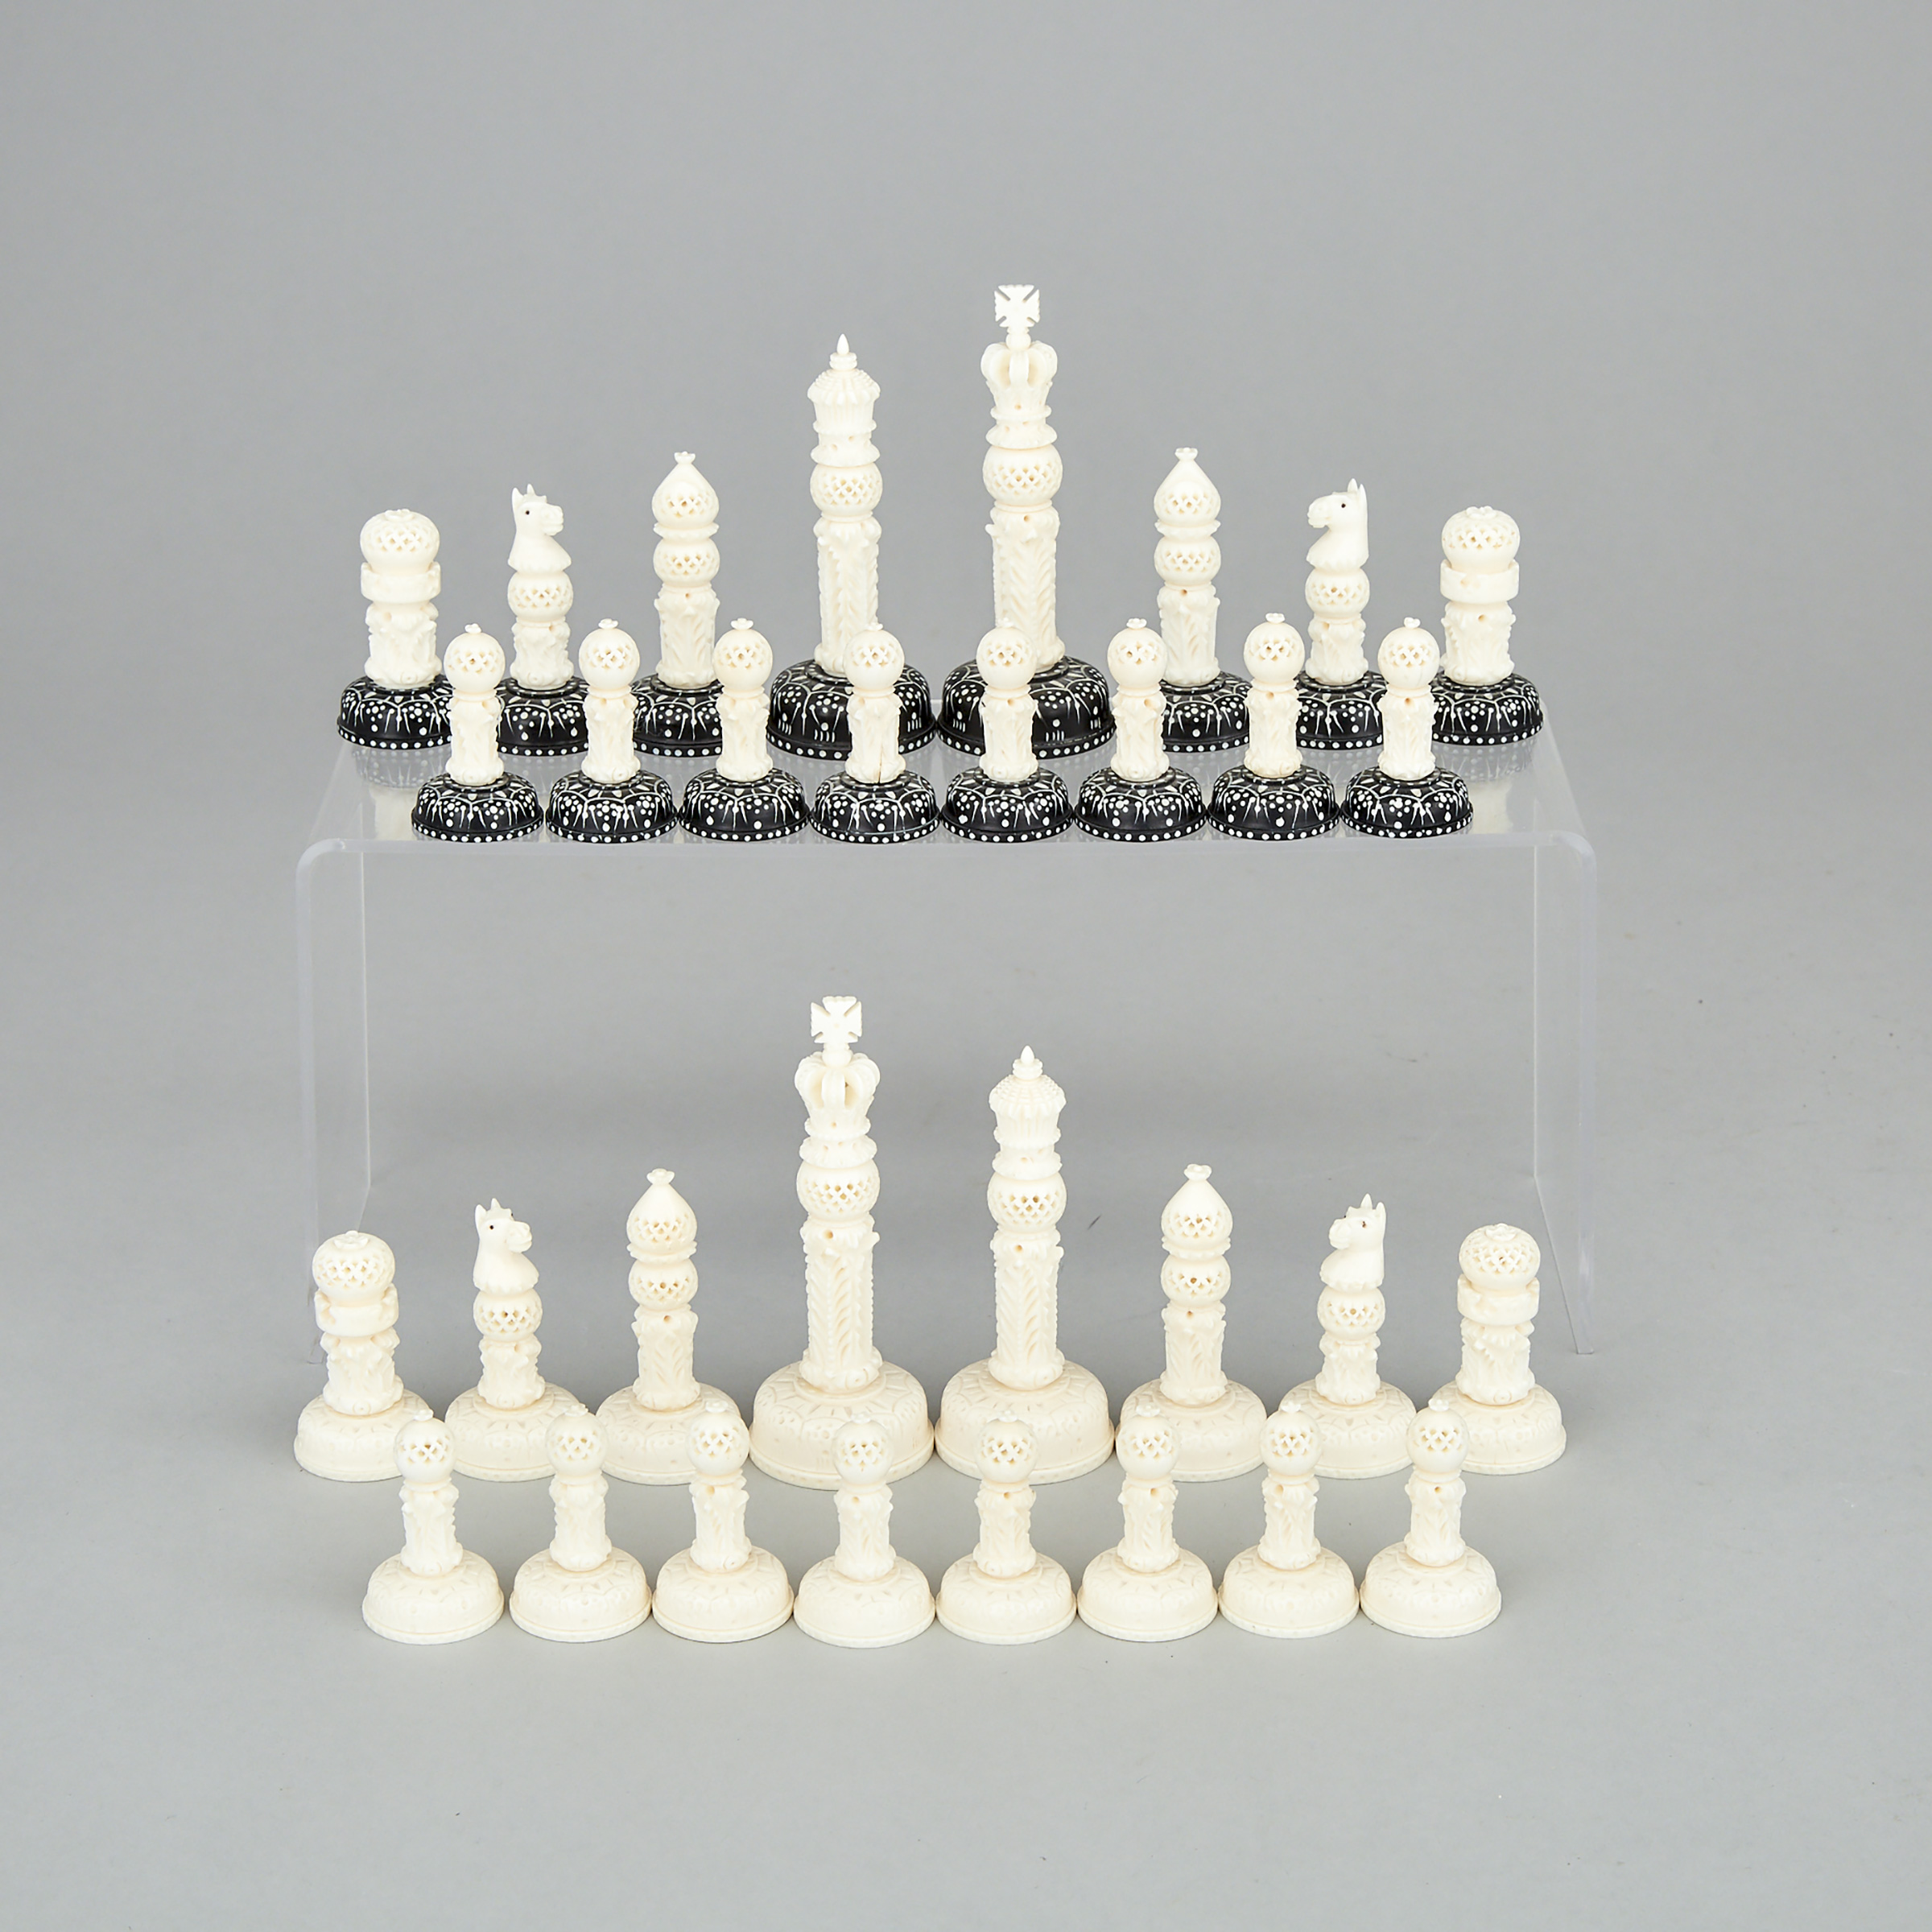 Indian Ivory Pierce Carved Chess Set, early-mid 20th century